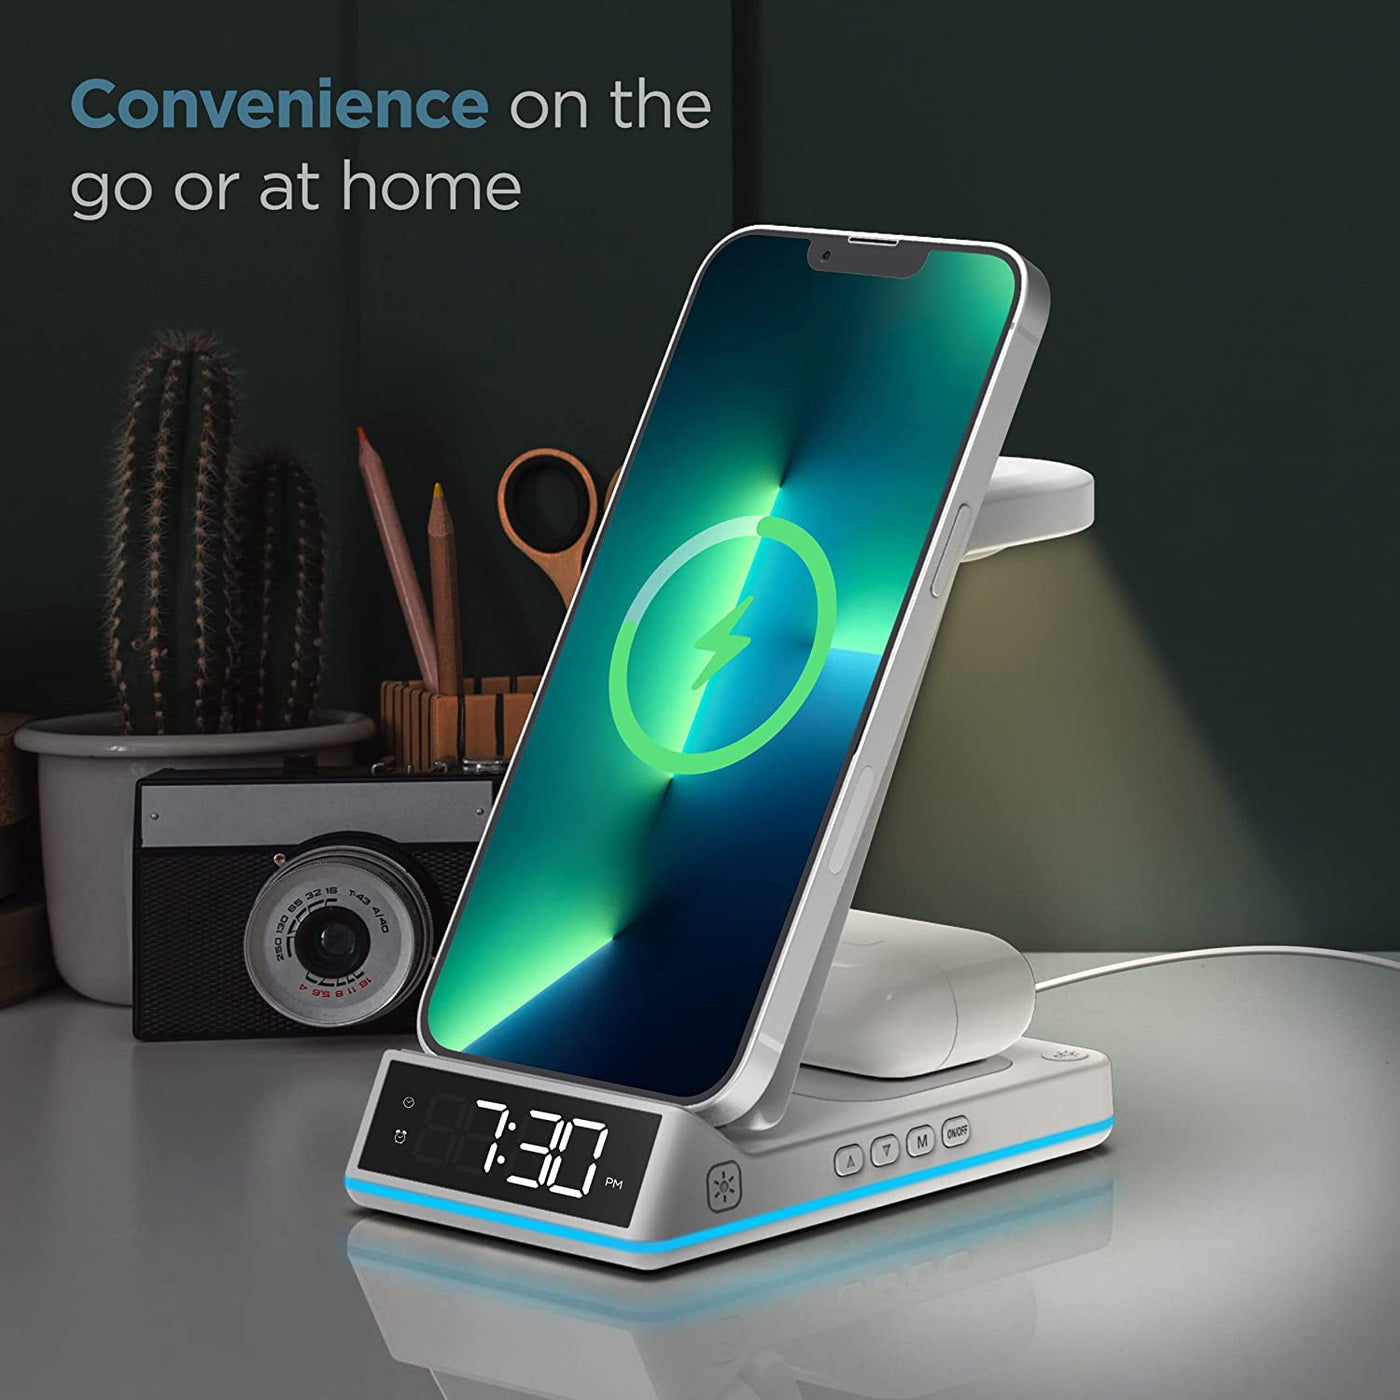 5-In-1 Charging Stand With Alarm Clock & Nightlight